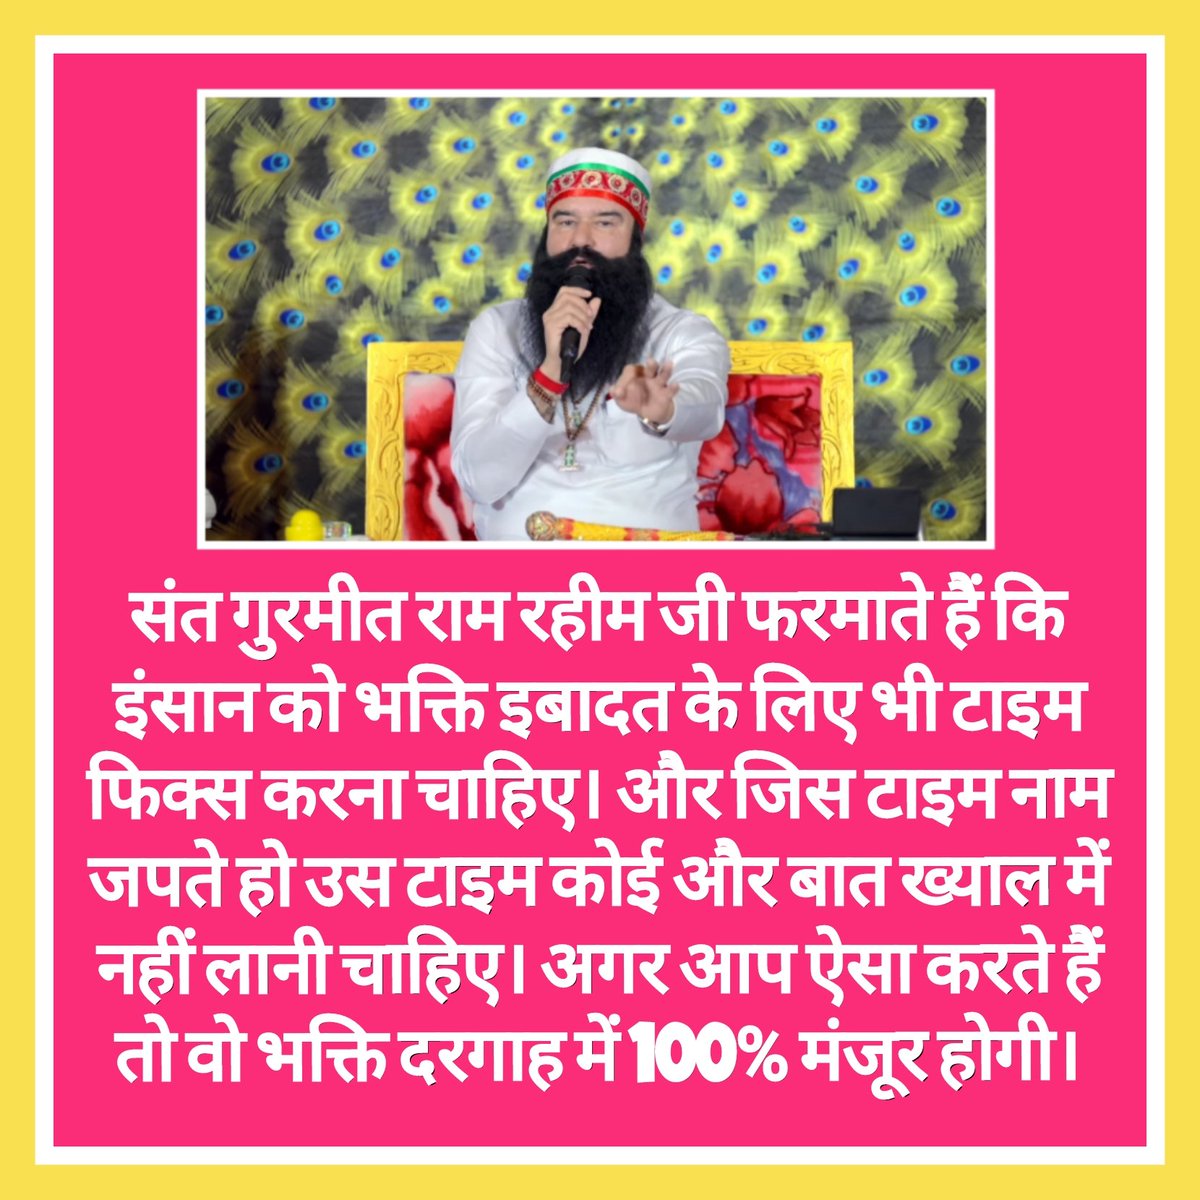 Saint Gurmeet Ram Rahim Ji recommends #ValueYourTime and also emphasizes on including meditation in daily routine which makes you spiritually stronger, ensures betterment of your overall health and also increases the life span. #TimeManagement